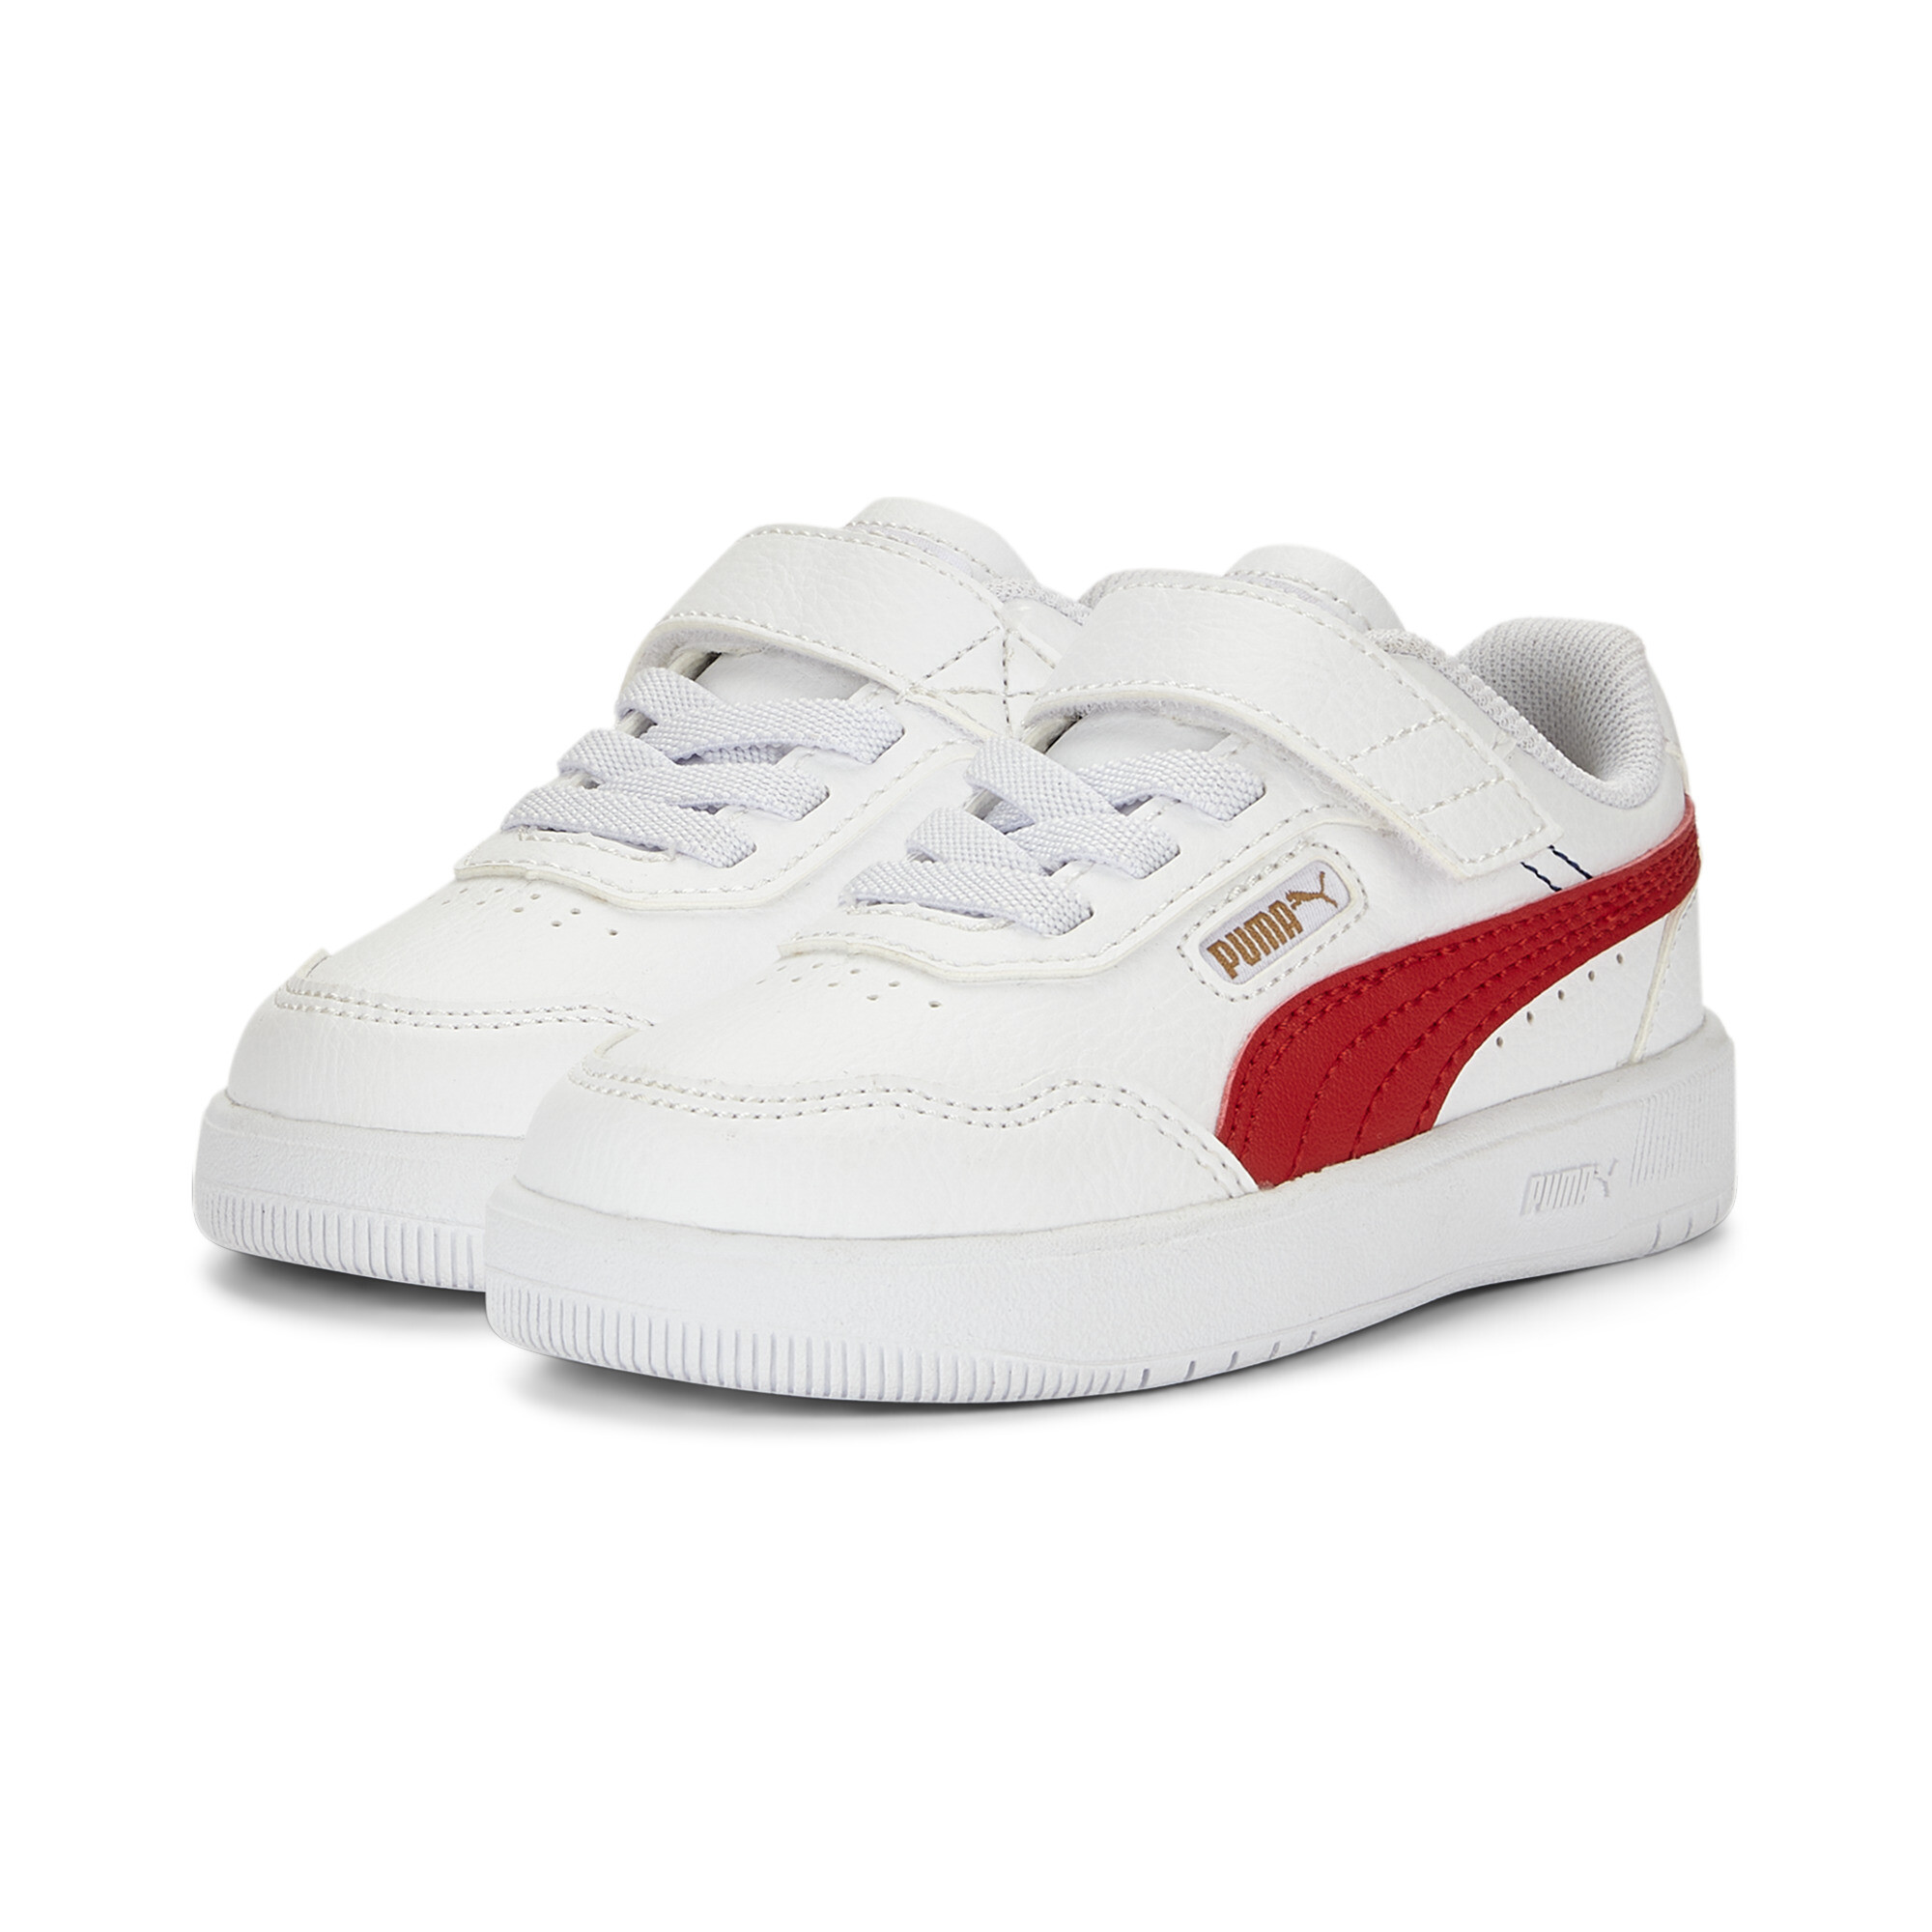 Kids' PUMA Court Ultra Shoes Baby In 20 - White, Size EU